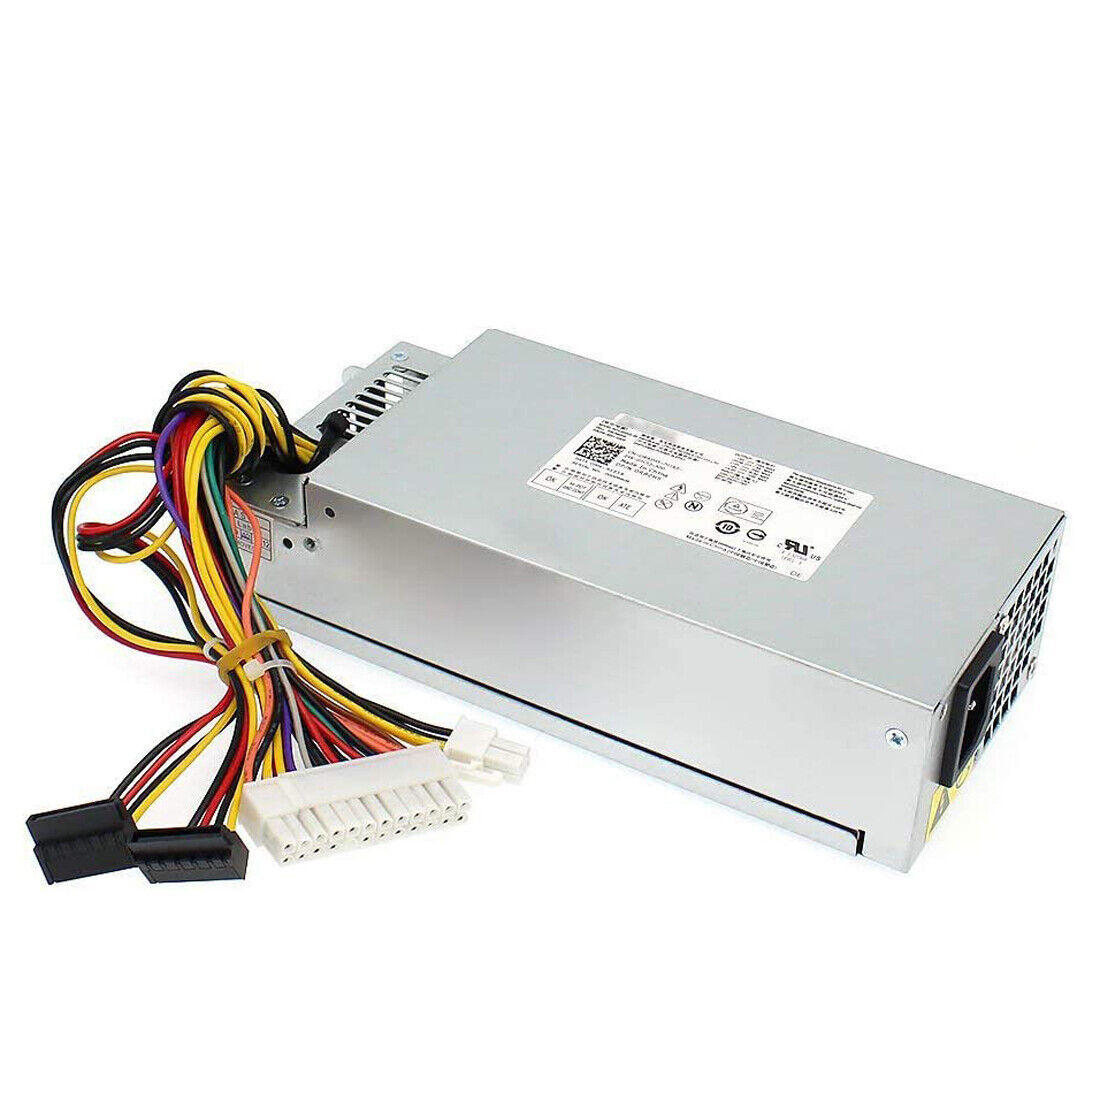 New Power Supply 220W fors Dell R82H5 R5RV4 RTTPJ FXV31 M32H8 P3JW1 TTXYJ 4C9X9